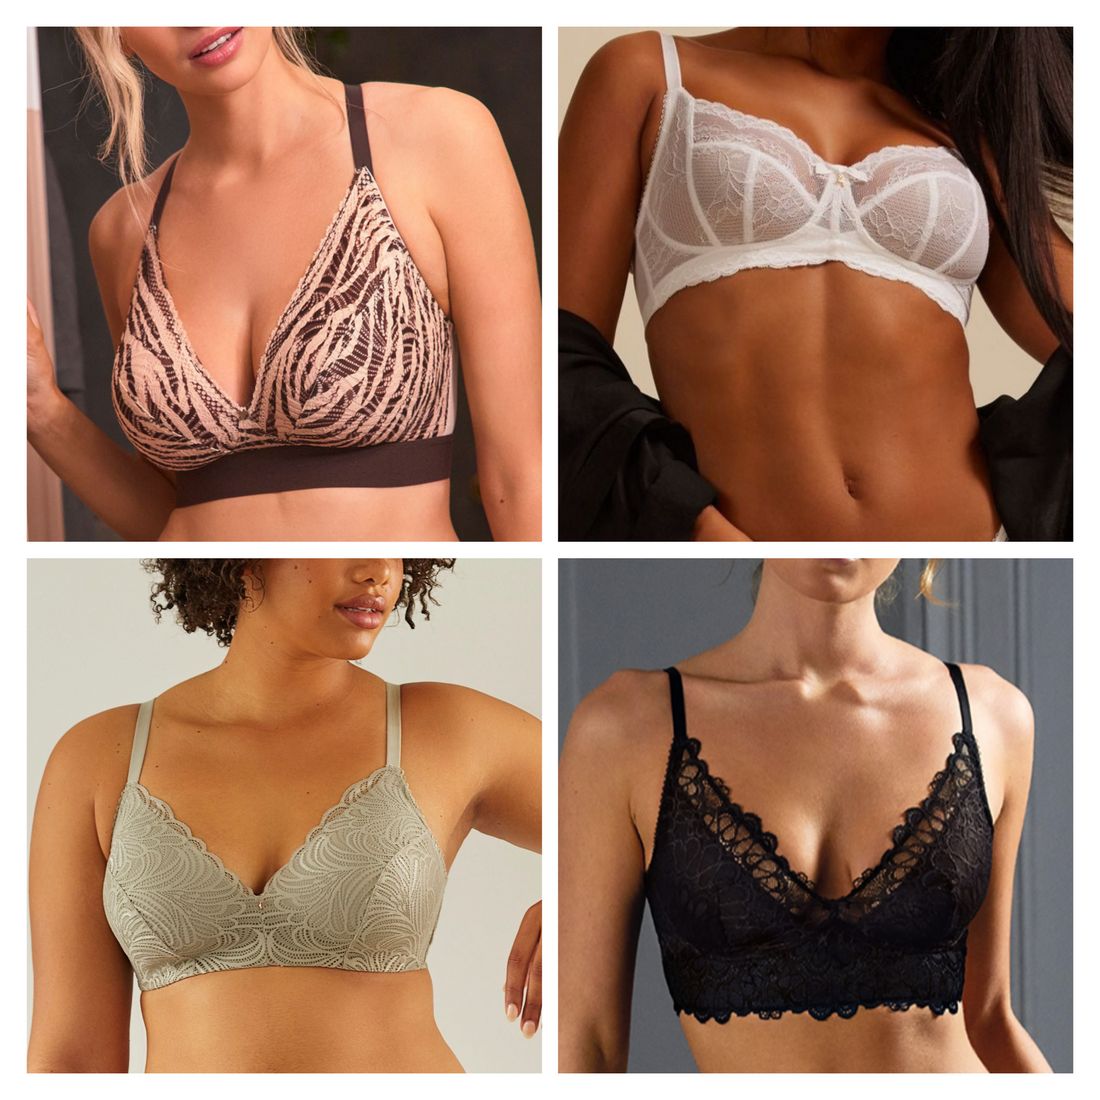 Here's How To Put On A Bra Without Over-Stretching The Band -  ParfaitLingerie.com - Blog